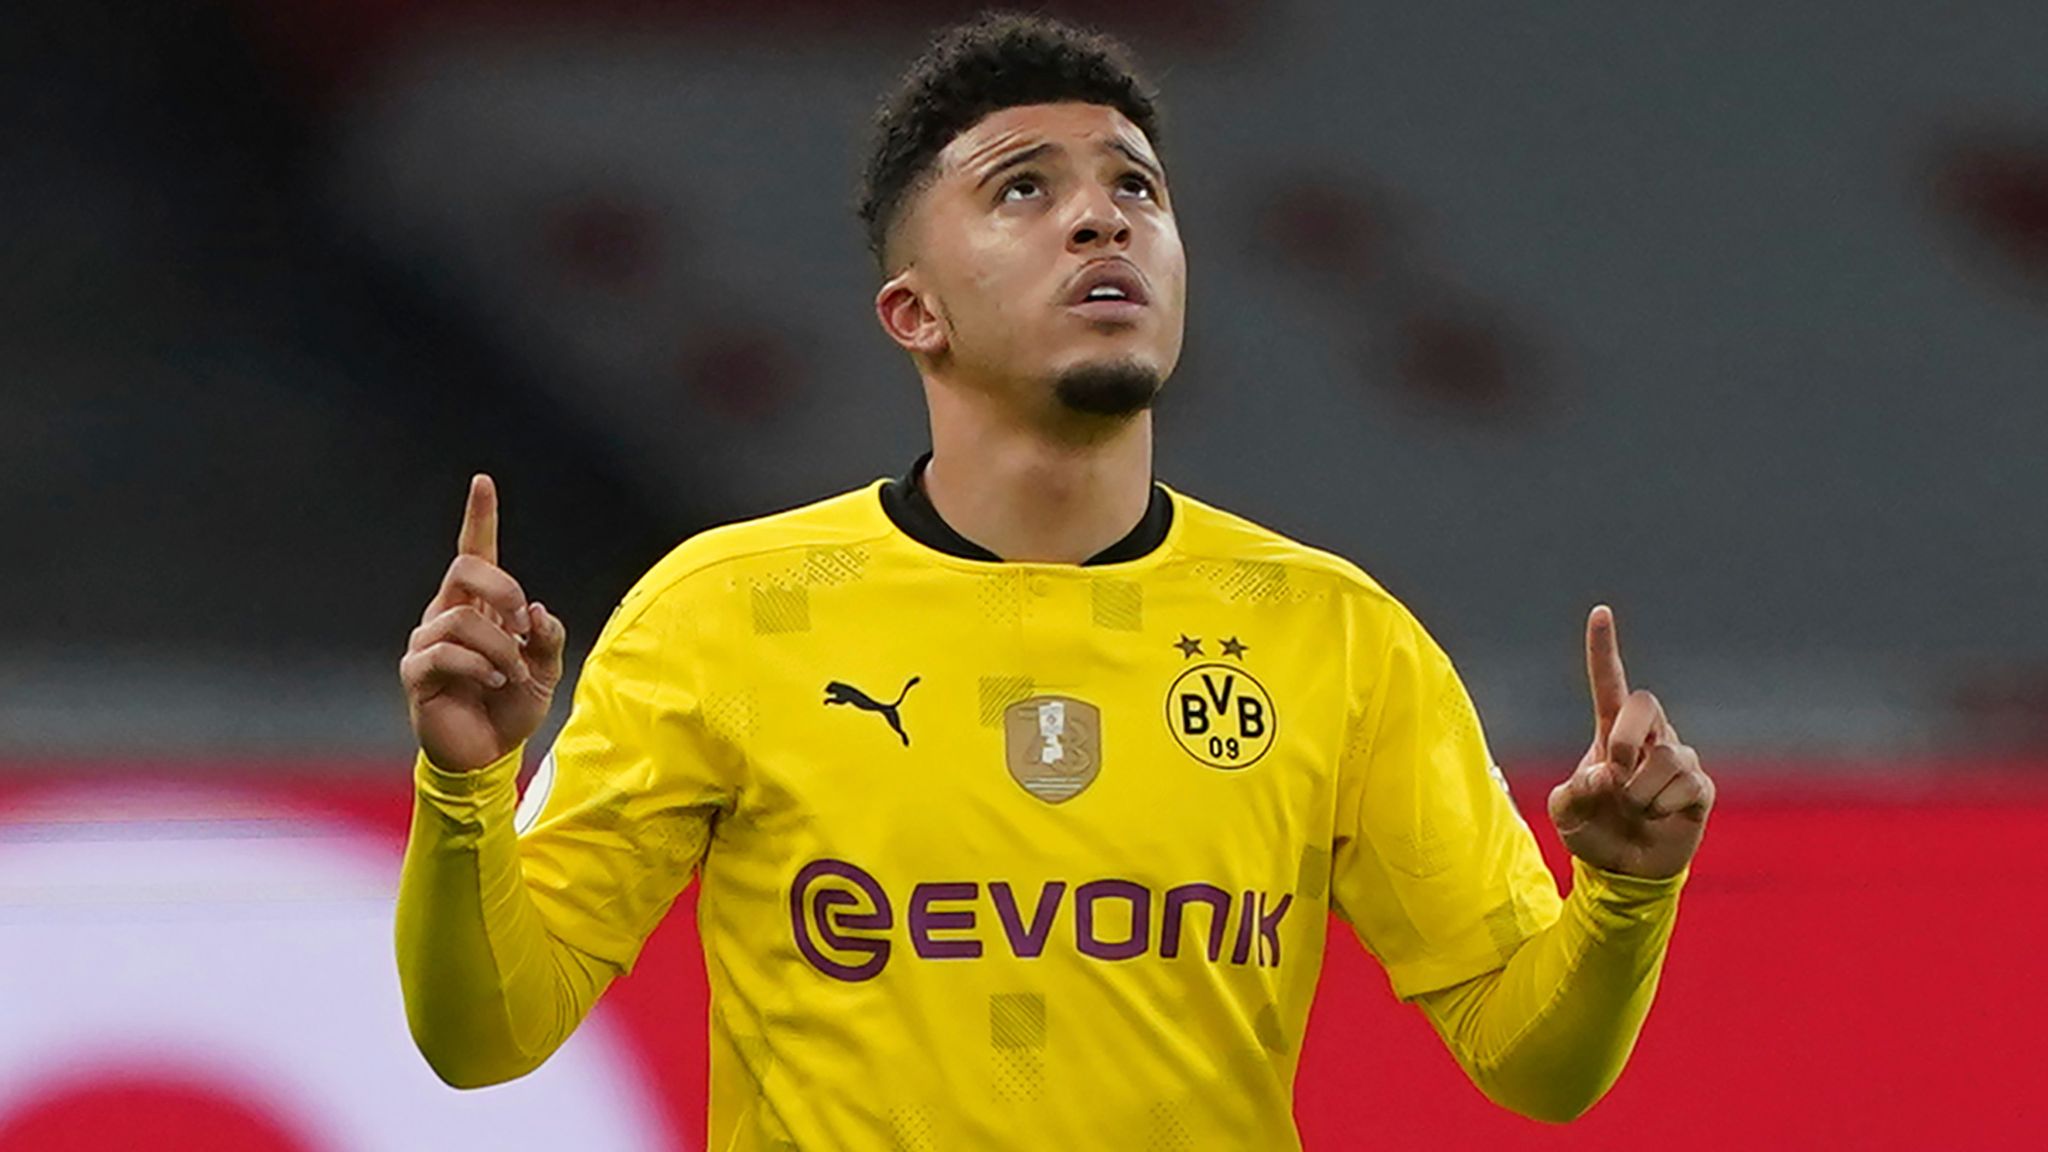 Manchester United agree £77m asking price for Sancho, deal to be finalised soon